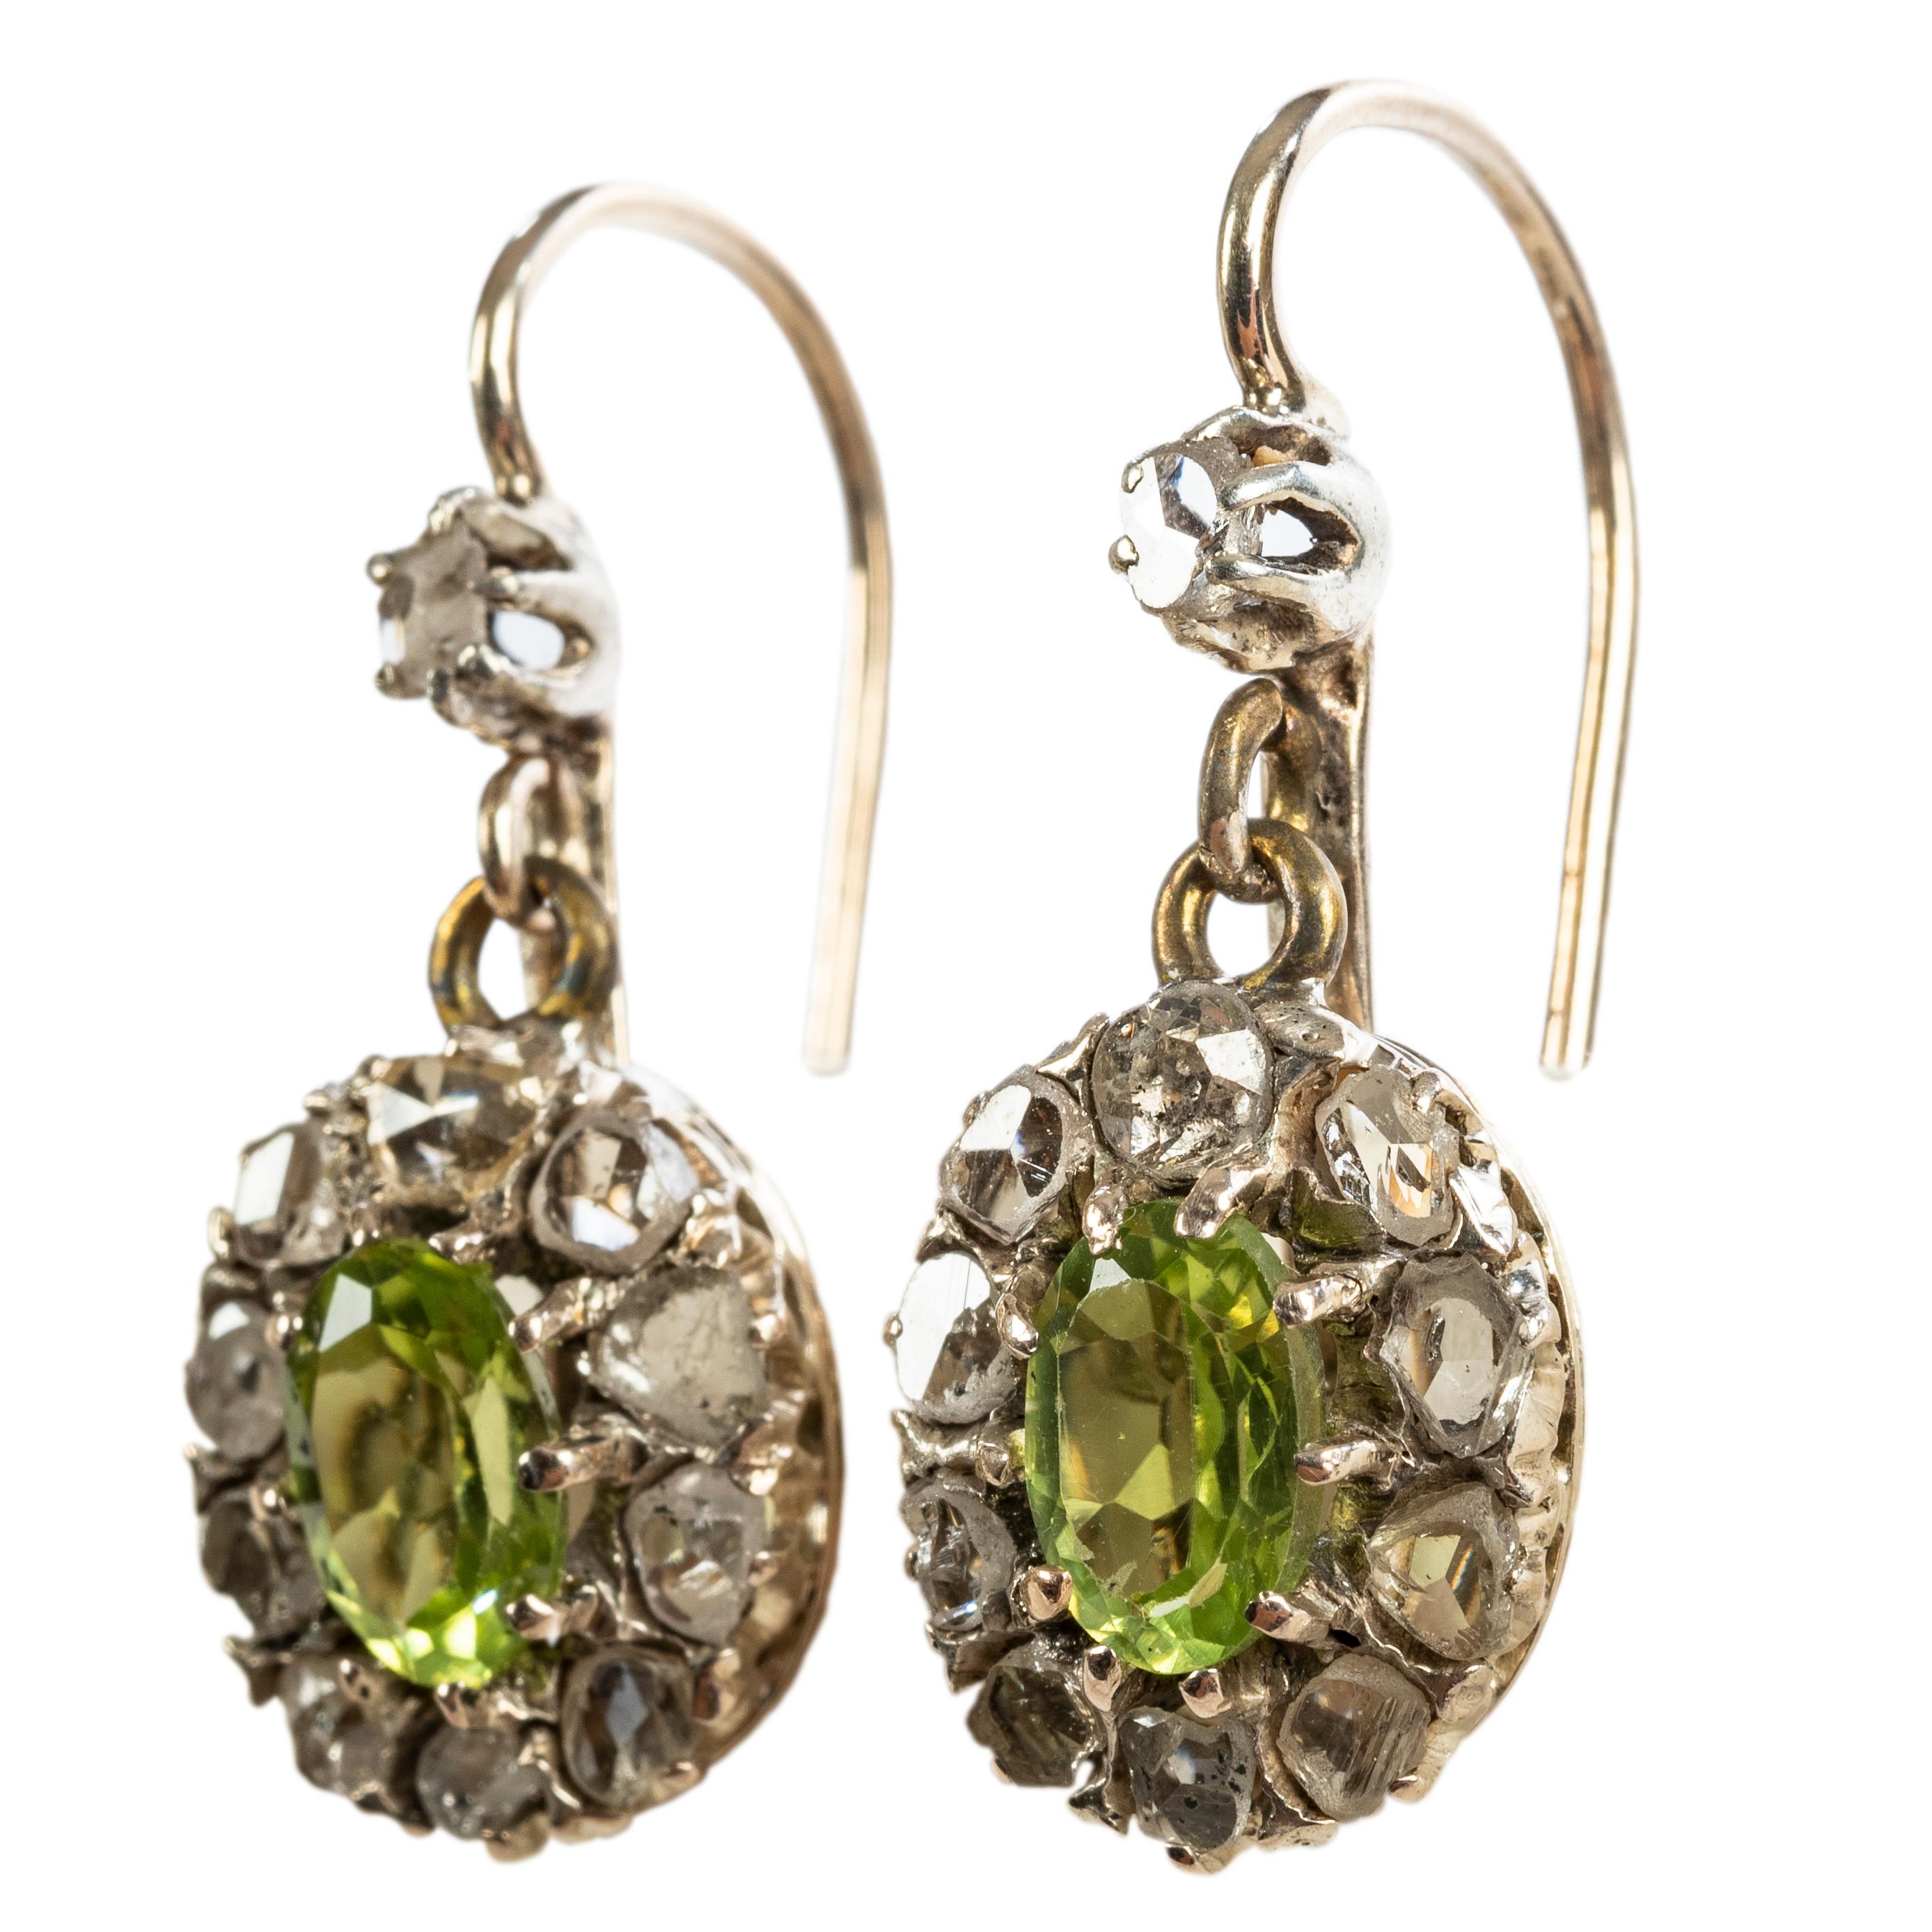 Designed as pendant earrings, each set with an oval cut peridot surrounded by ten faceted antique-cut diamonds, suspended from a single diamond, mounted in silver and gold, fitted with gold wire backs

English, 19th century

1 in. (2.5 cm) long;